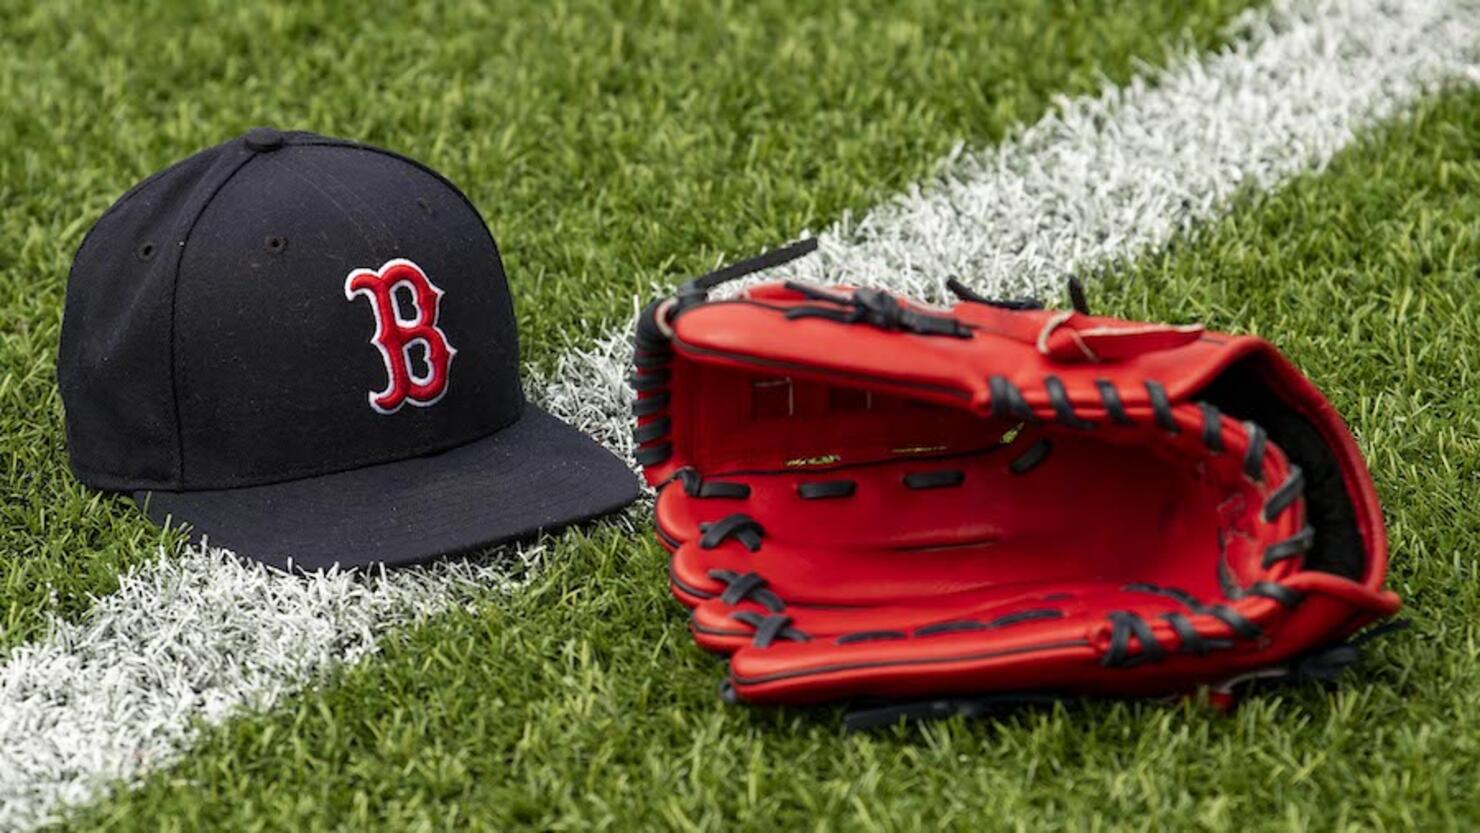 Red Sox Wearing 'Boston' Home Jerseys For Patriots' Day Matinee (Photo) 